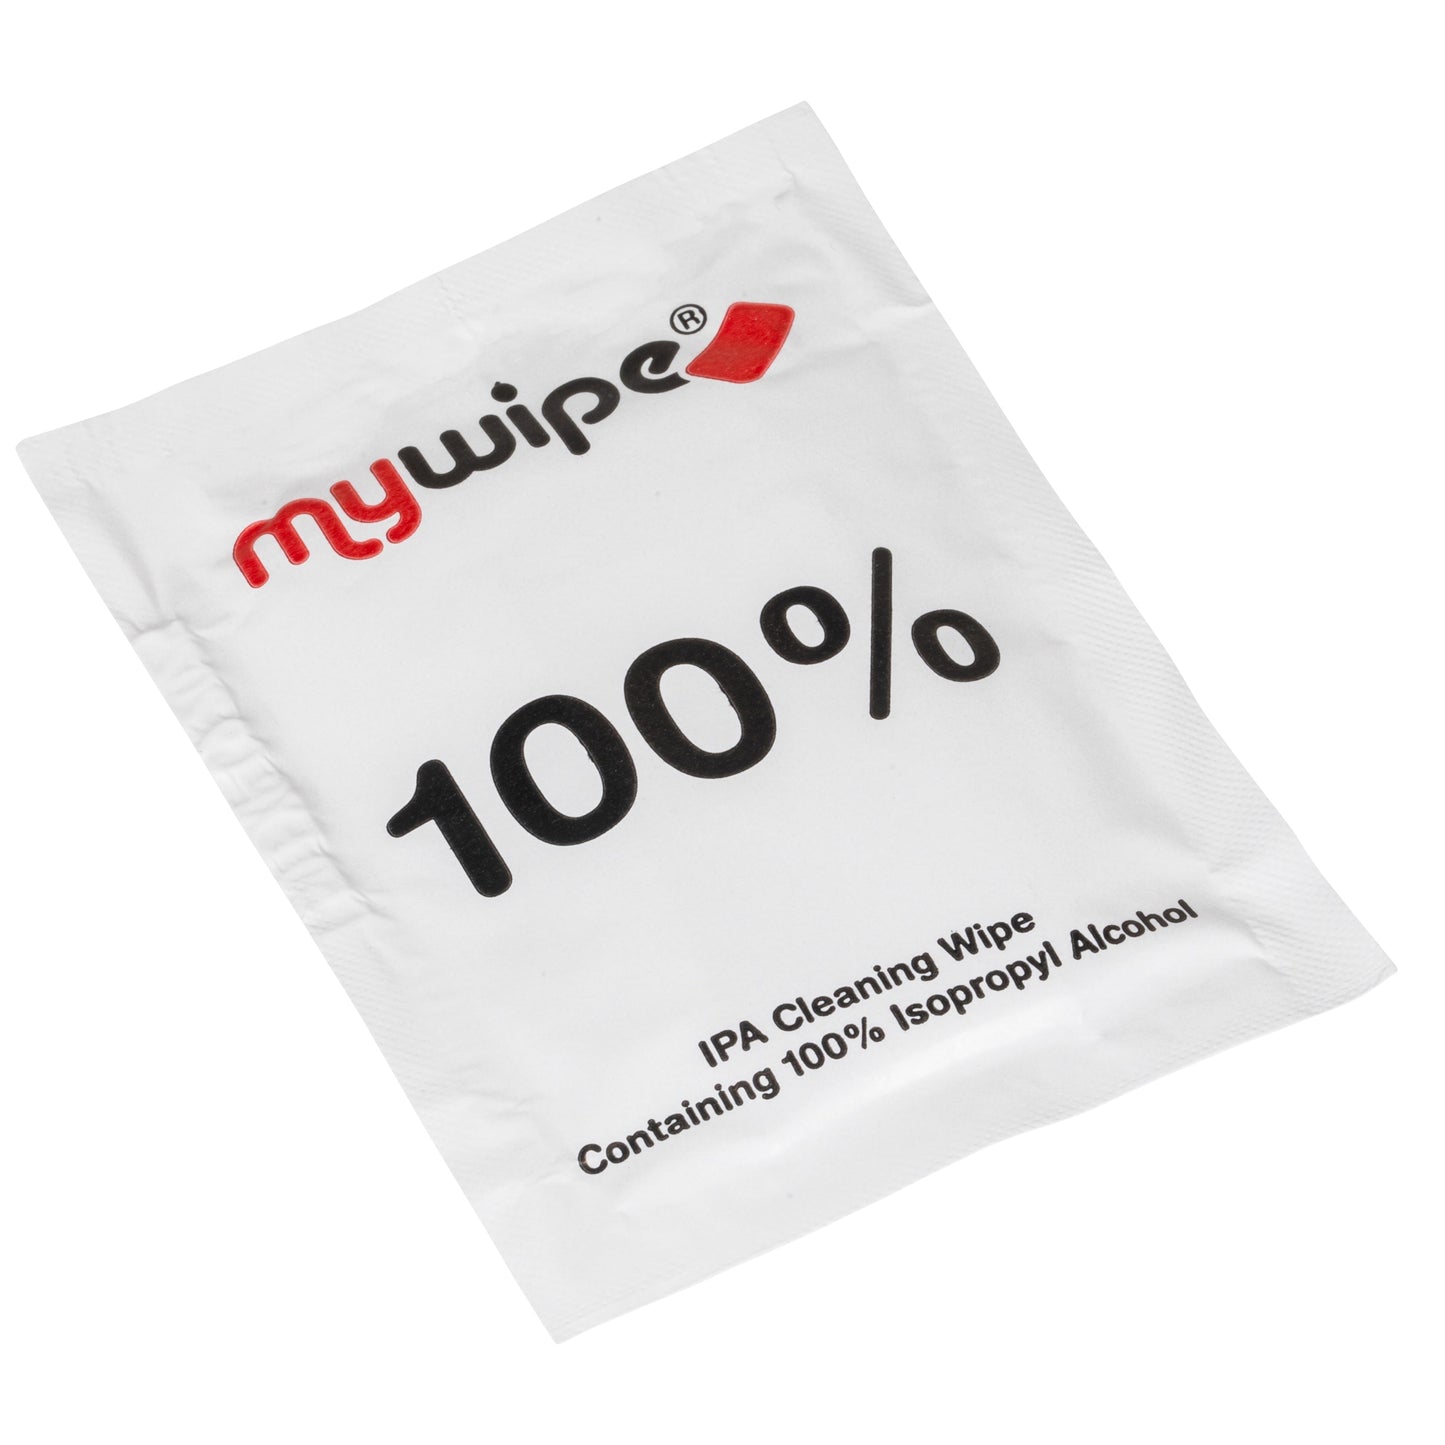 100% ALCOHOL WIPE SACHETS - CASE OF 1000